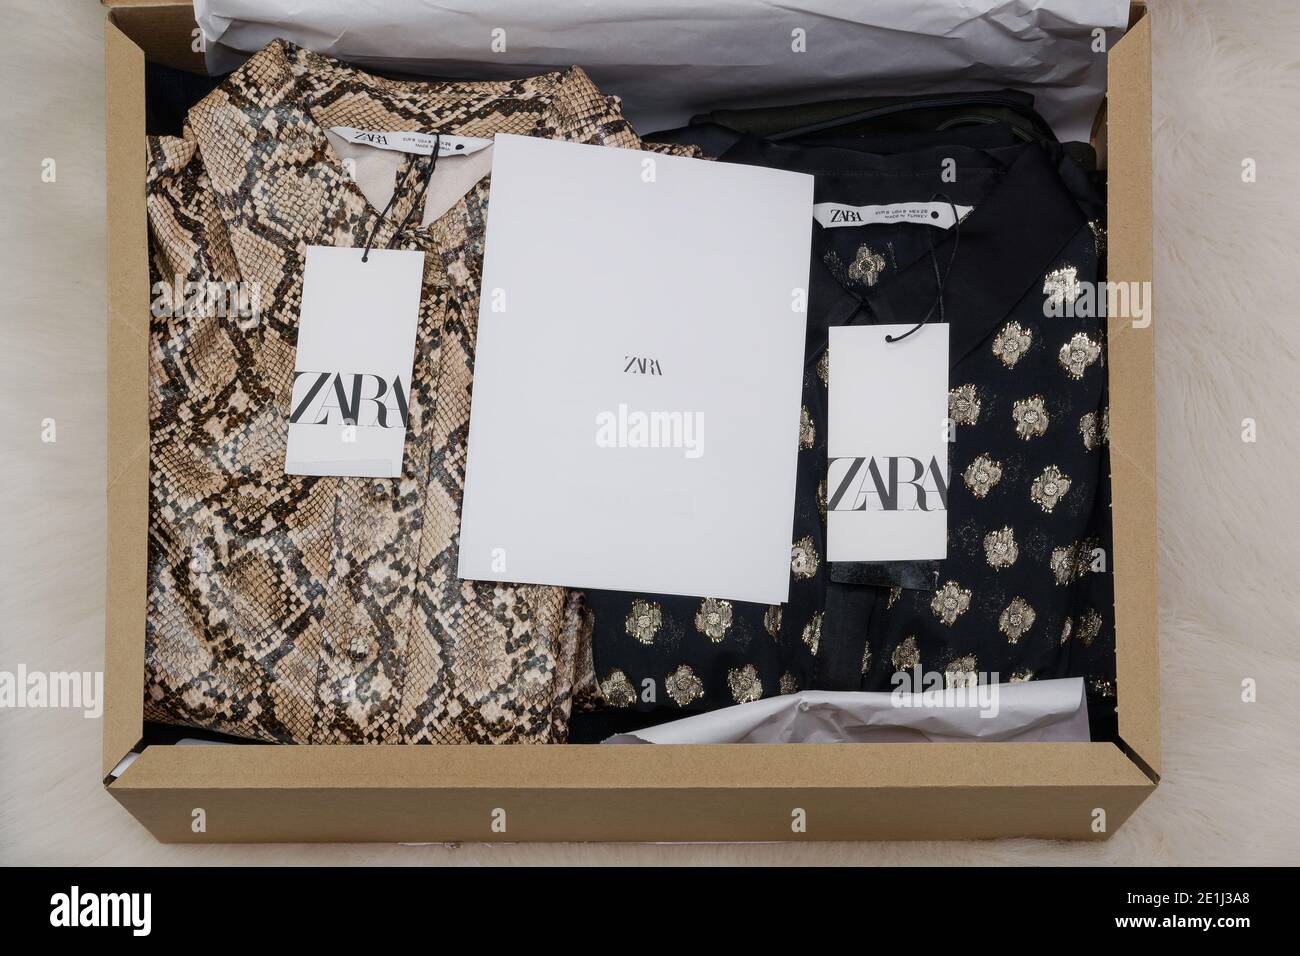 Zara Spanish clothes brand online delivery box. Open carton order package  containing Inditex retailer wearables with company logo Stock Photo - Alamy